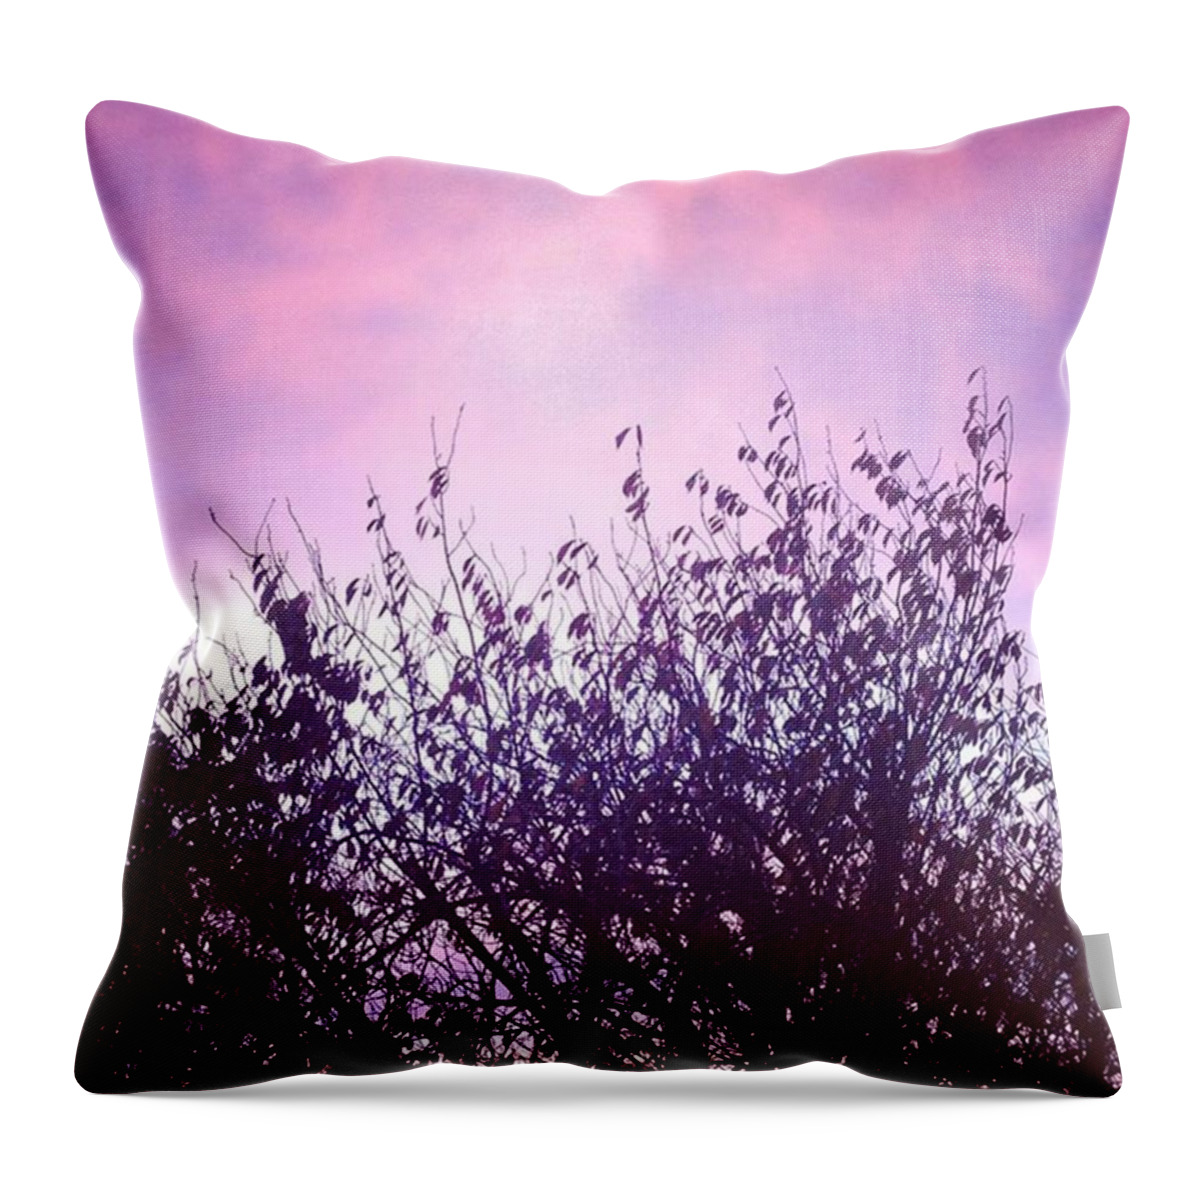 Silhouette Throw Pillow featuring the photograph Sky Silhouette by Ruthie Hindes